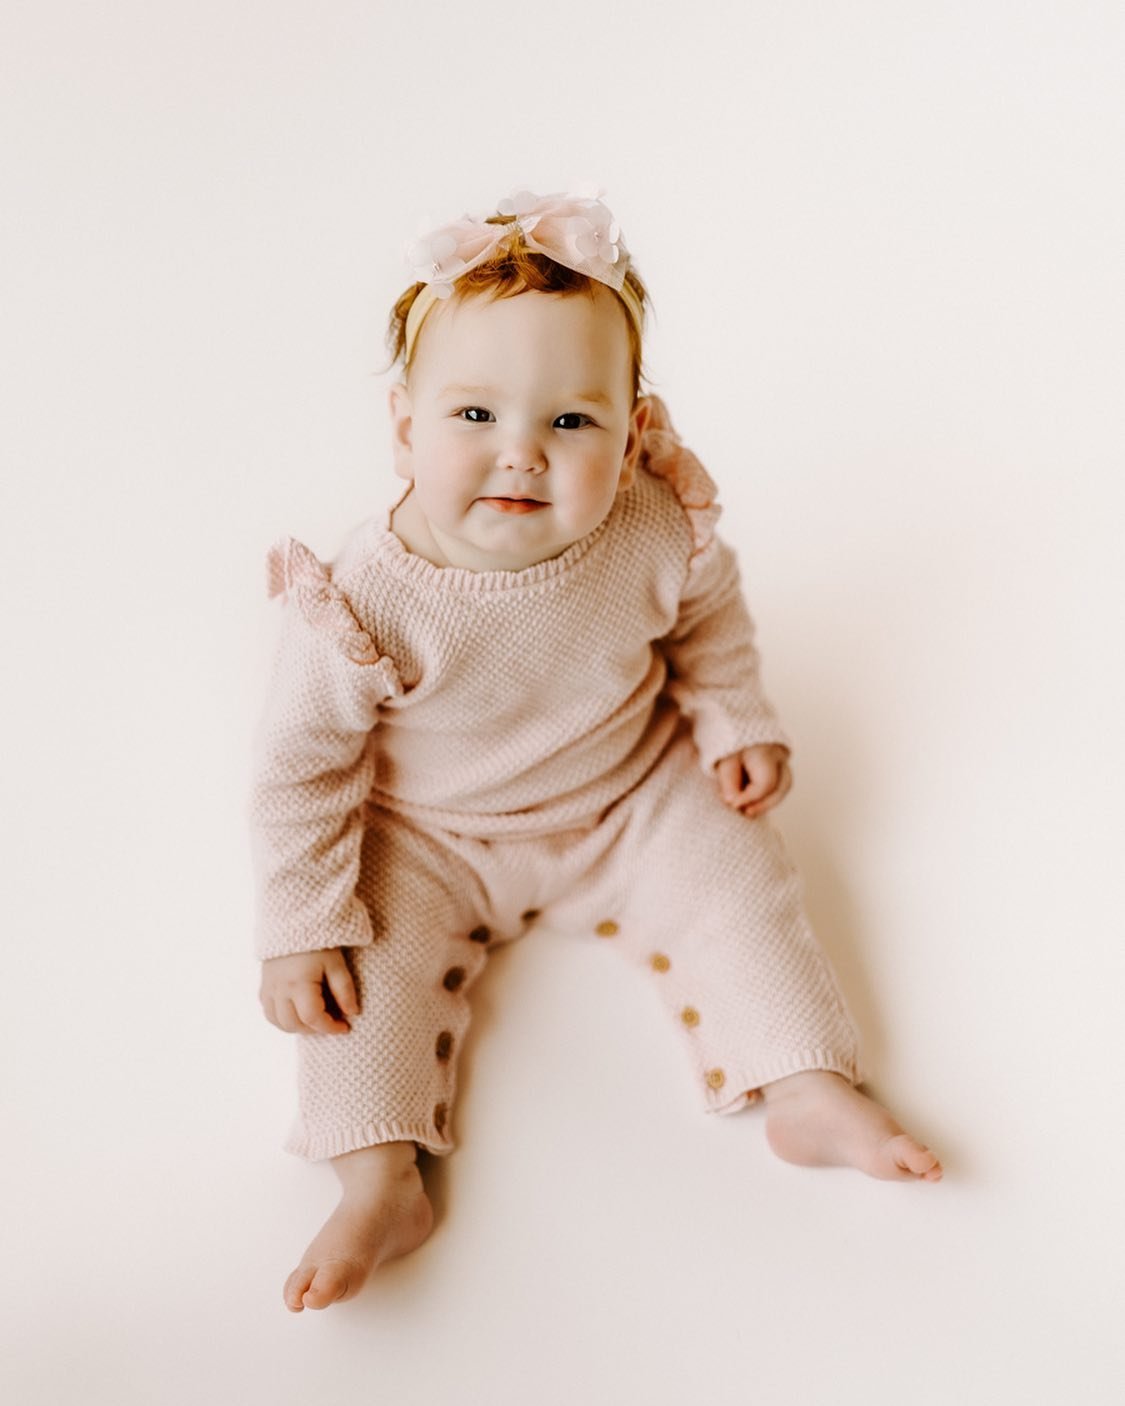 So so so excited for Friday&rsquo;s styled shoot and Saturday&rsquo;s spring studio minis &hellip; hopefully I get to see some cuties like little Nora here 🌸 I&rsquo;ve sent out location details for the whole weekend, message me if you have any othe